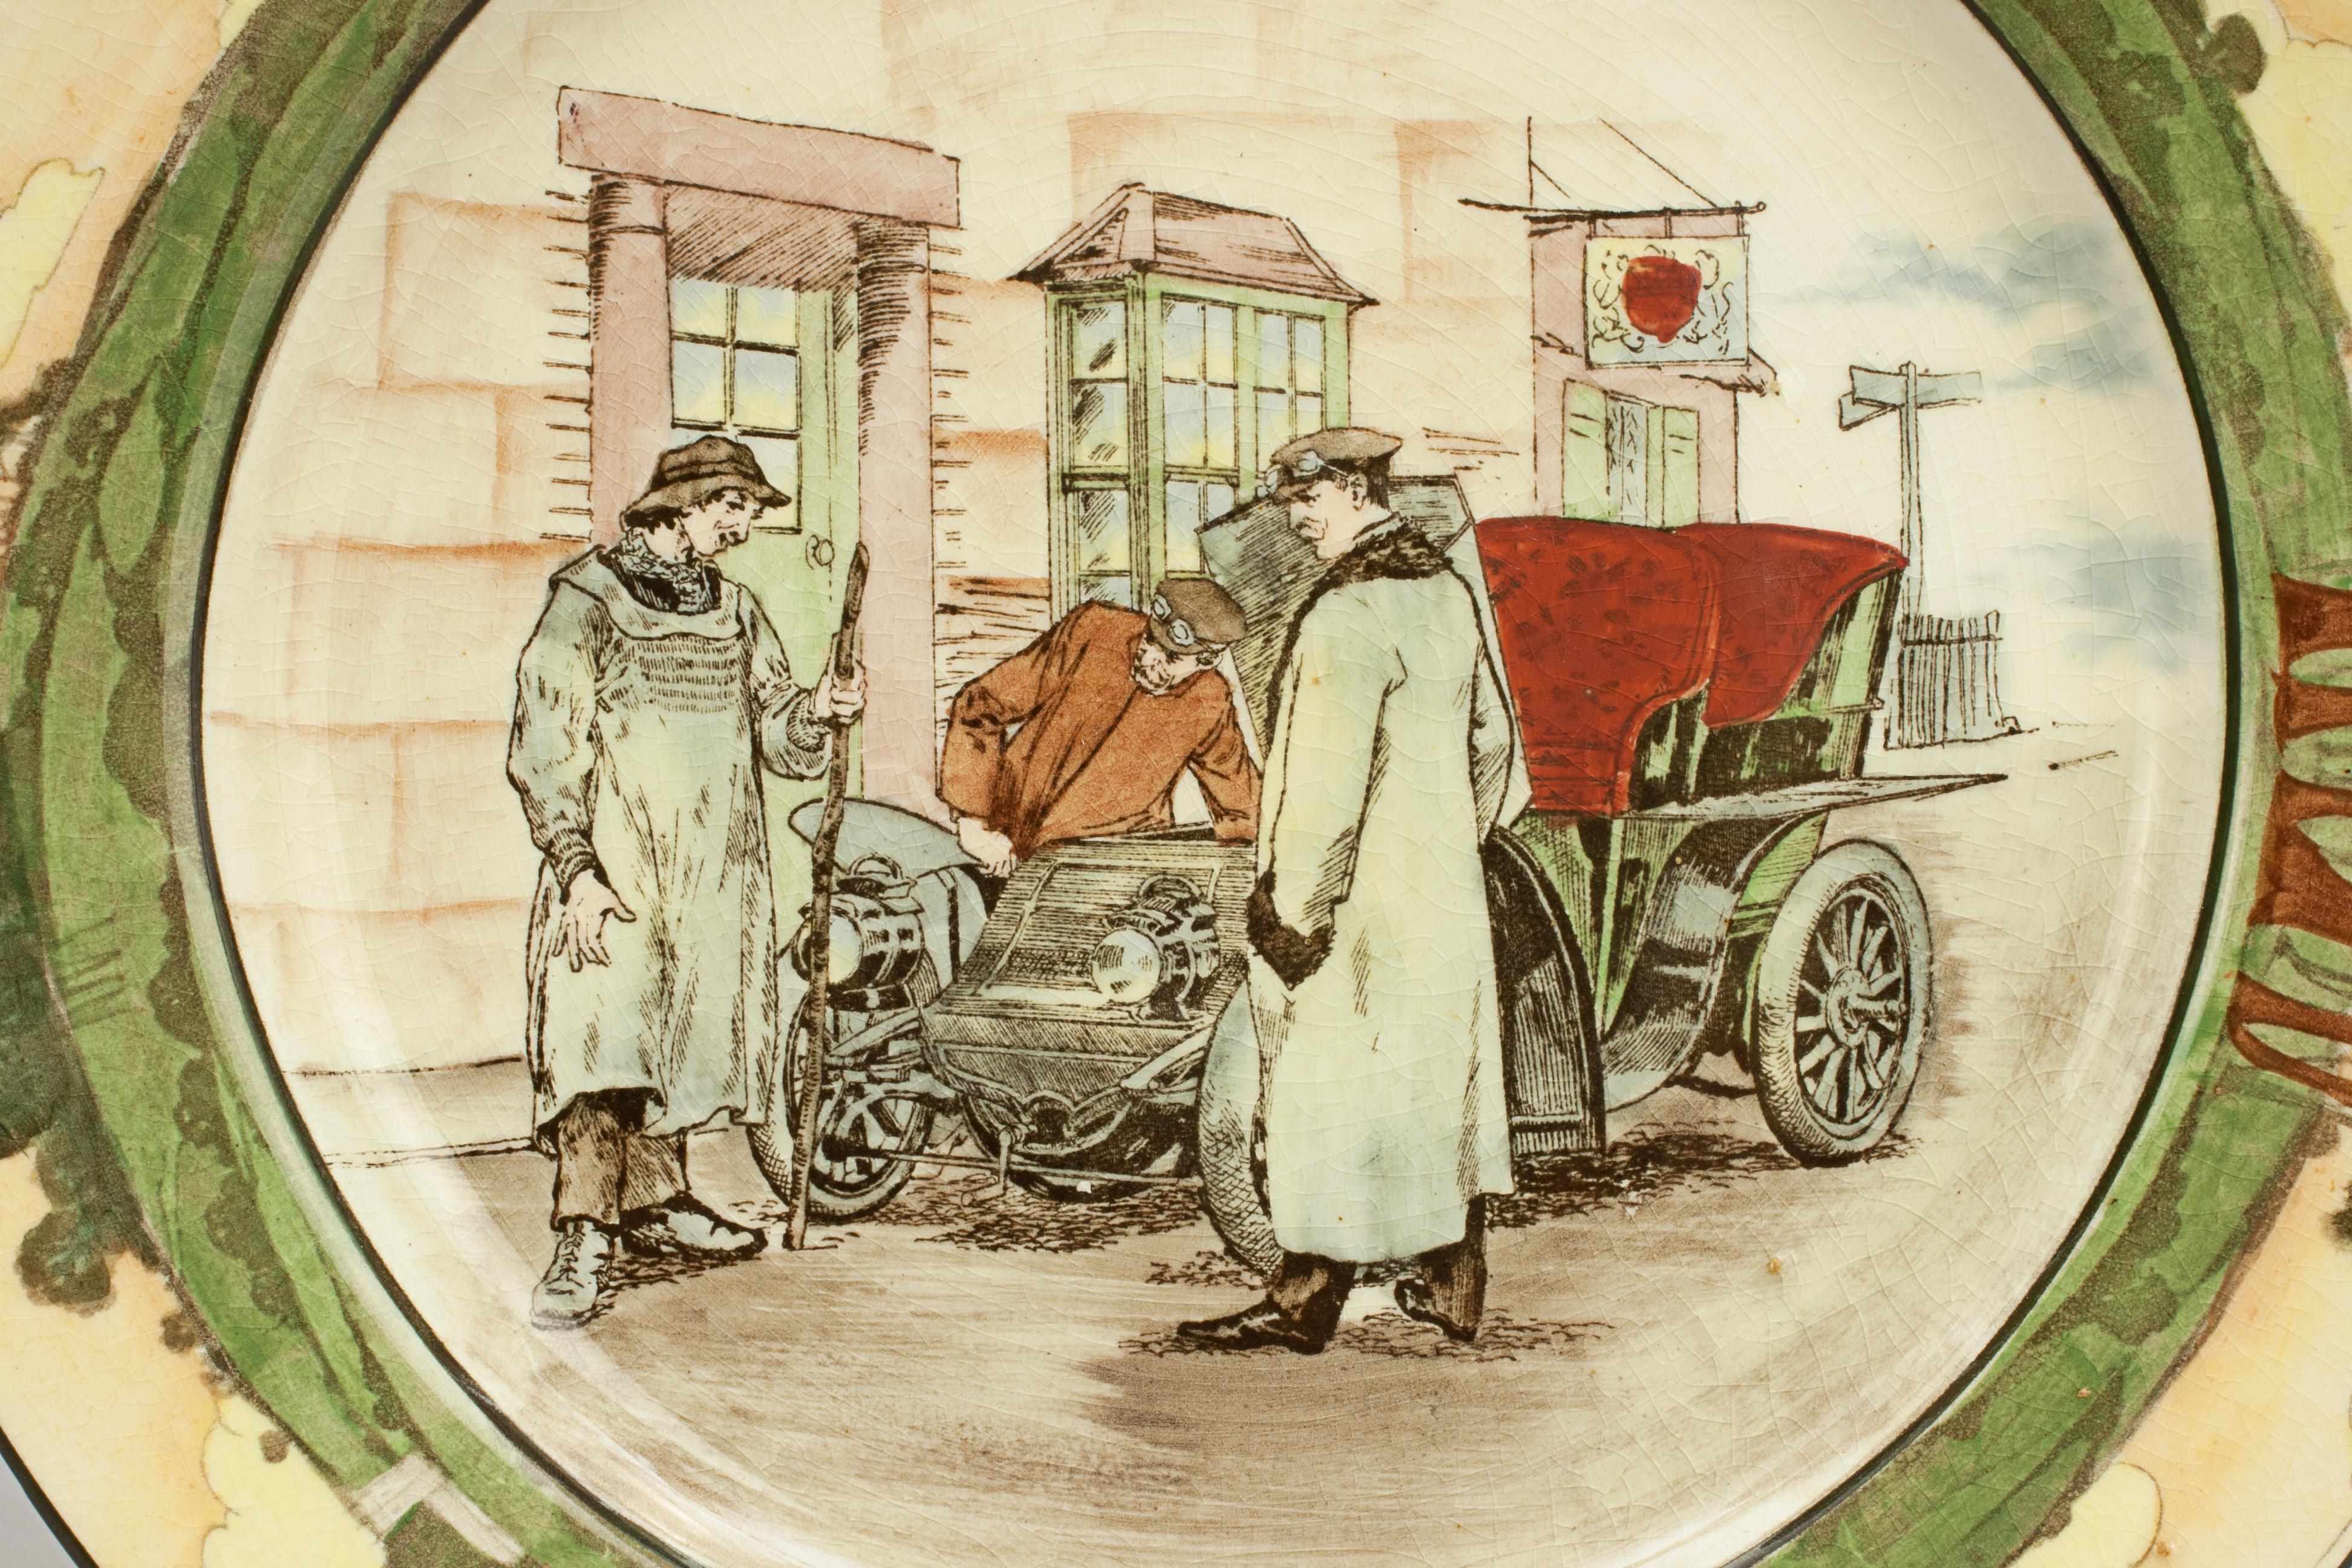 Rare Royal Doulton motoring plate.
An early Royal Doulton automobile plate depicting a yokel talking to two motorists outside the Chequers Inn. The plate has the printed Royal Doulton trademark, Royal Doulton with the lion and crown, and the